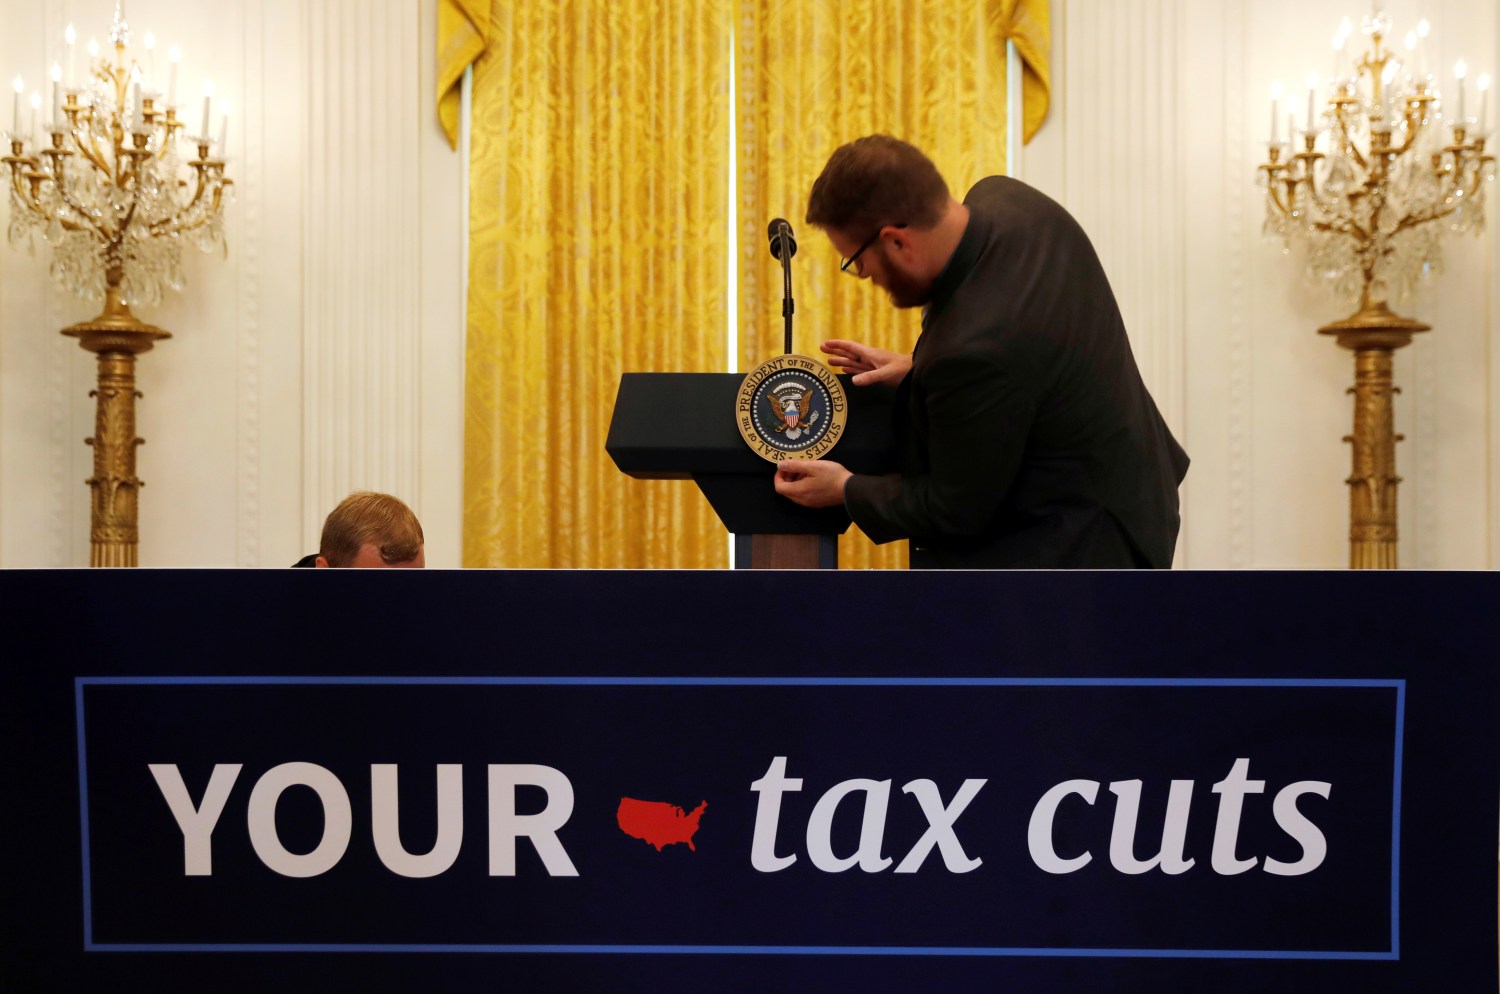 The Presidential seal is placed upon the lectern before U.S. President Donald Trump delivers remarks celebrating six months since his tax cuts victory at the White House in Washington, U.S., June 29, 2018. REUTERS/Kevin Lamarque - RC15EF5787B0